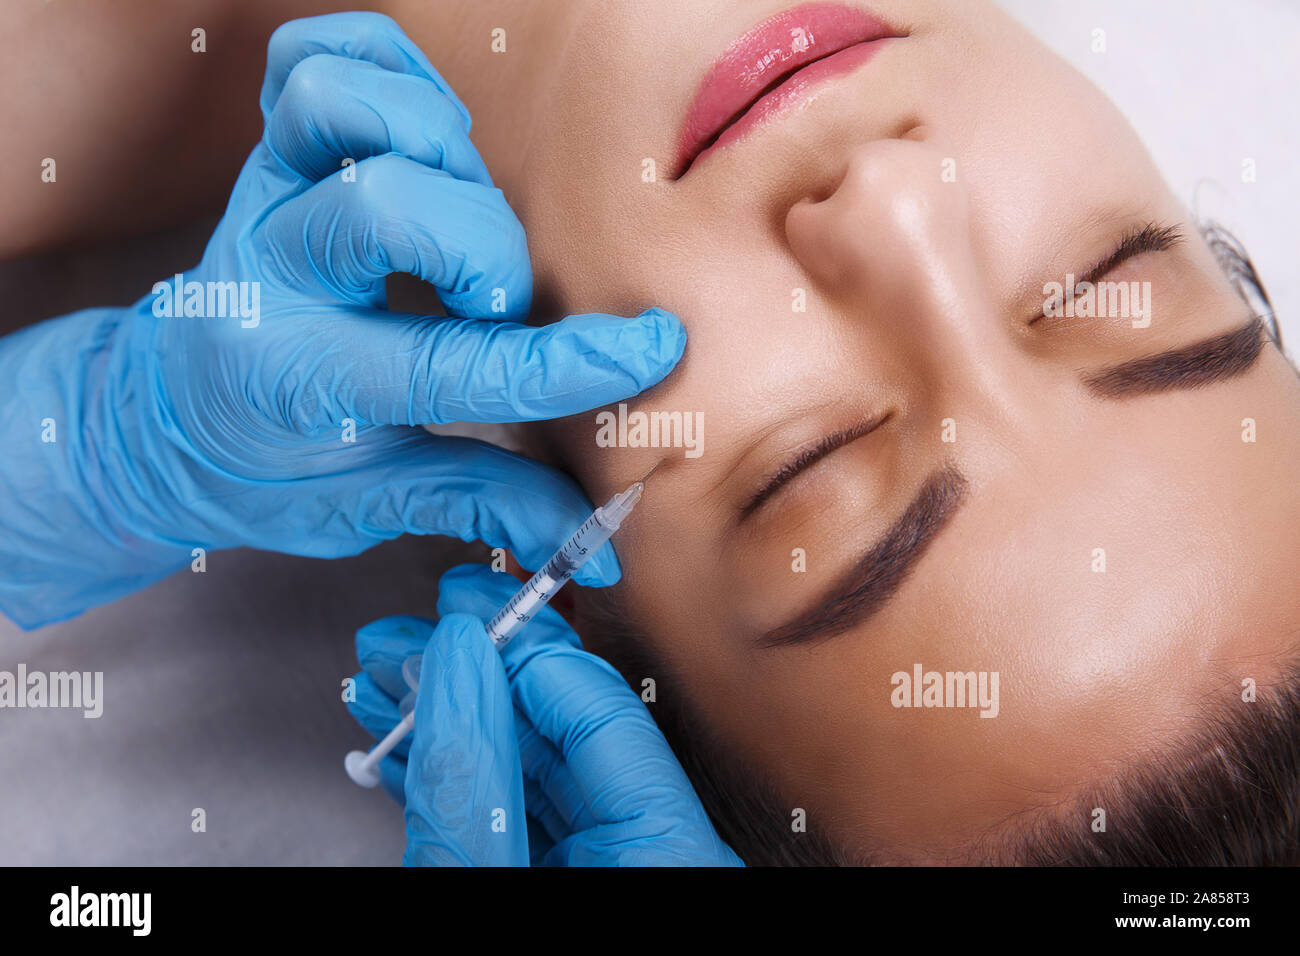 Facial Beauty Injections. Portrait Beautiful Young Woman Receiving Hyaluronic Acid Injection. Closeup Of Hands In Gloves Holding Syringe Near Stock Photo